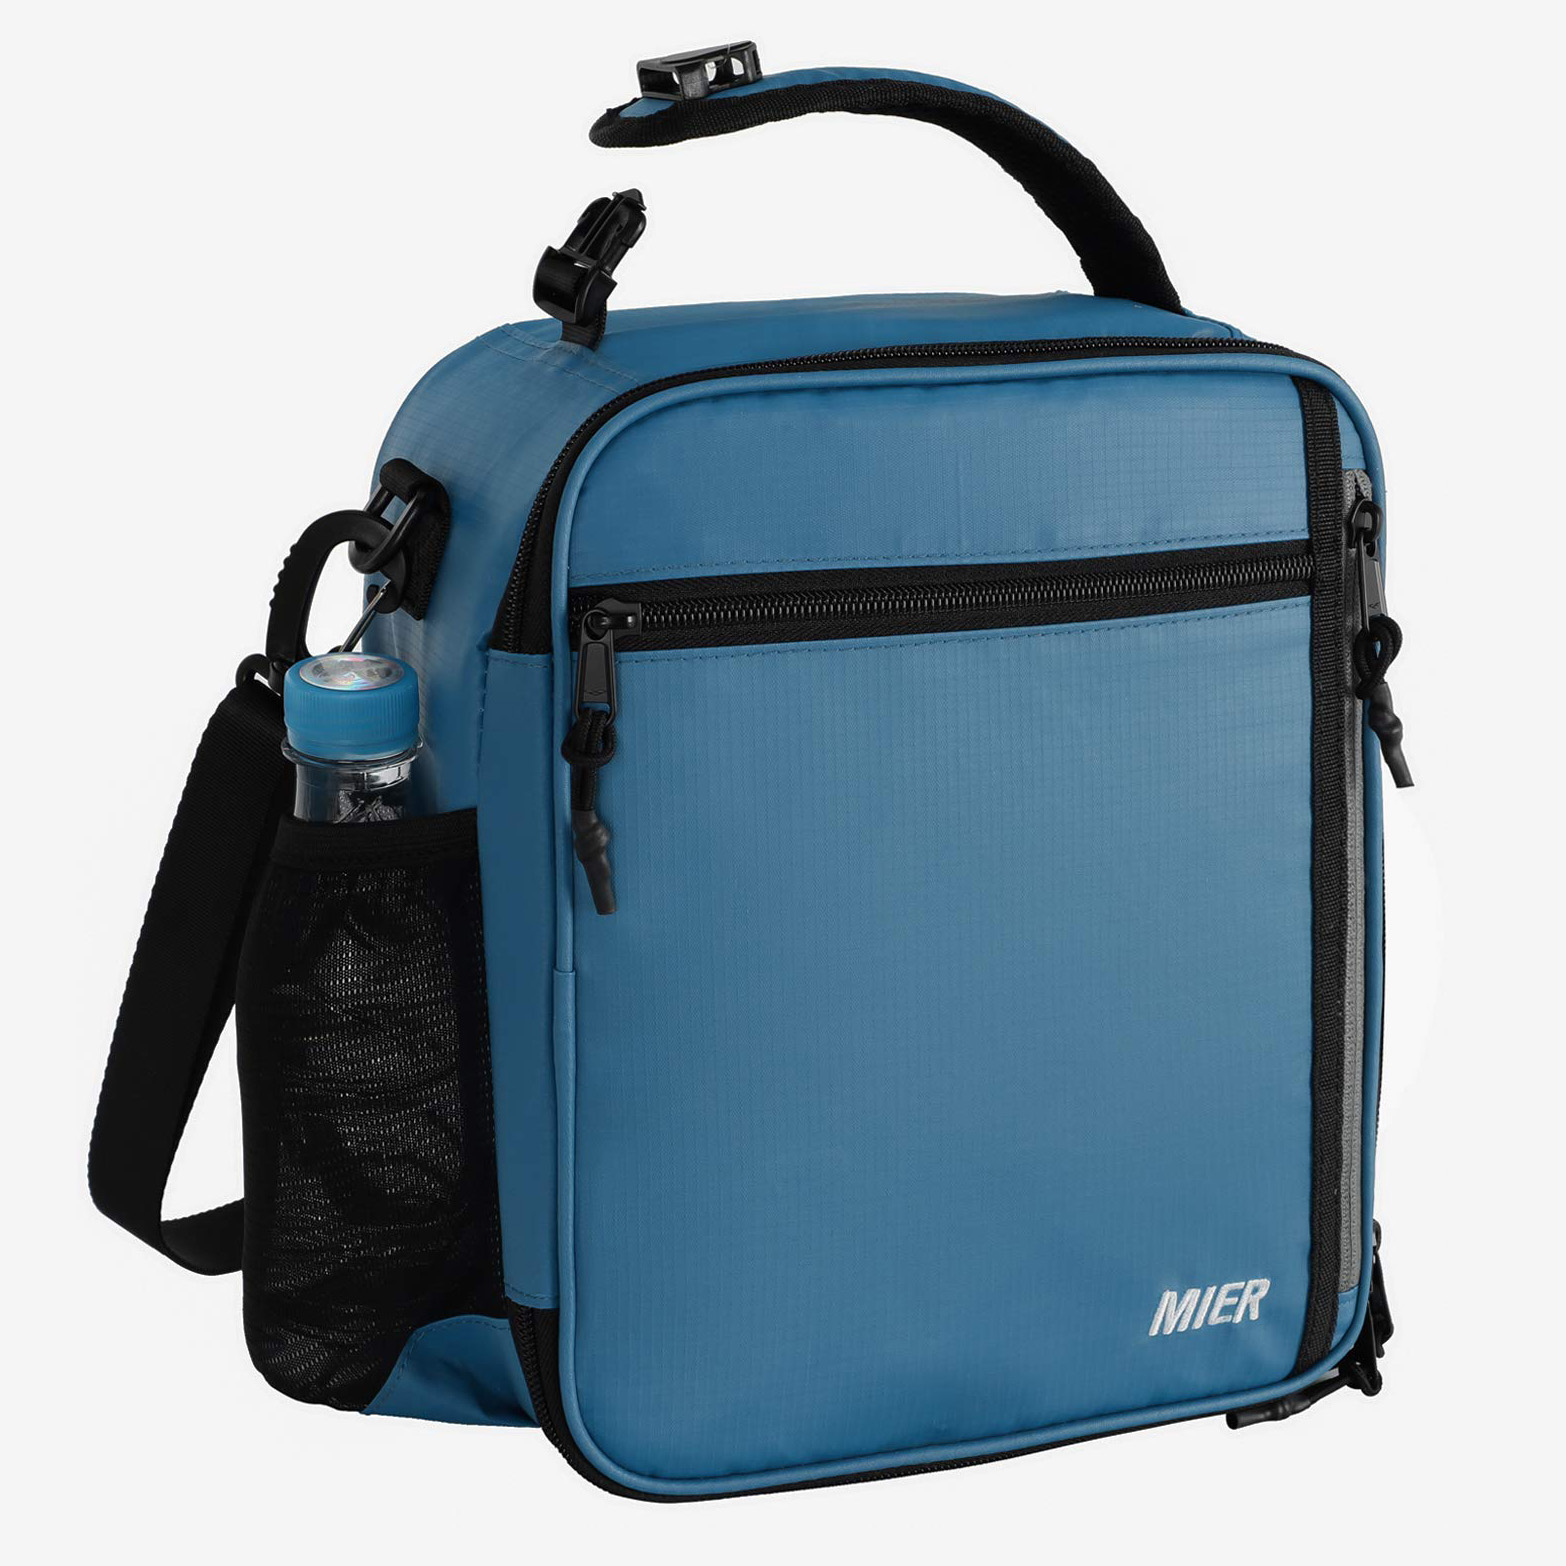 MIER Insulated Lunch Box Bag with Shoulder Strap